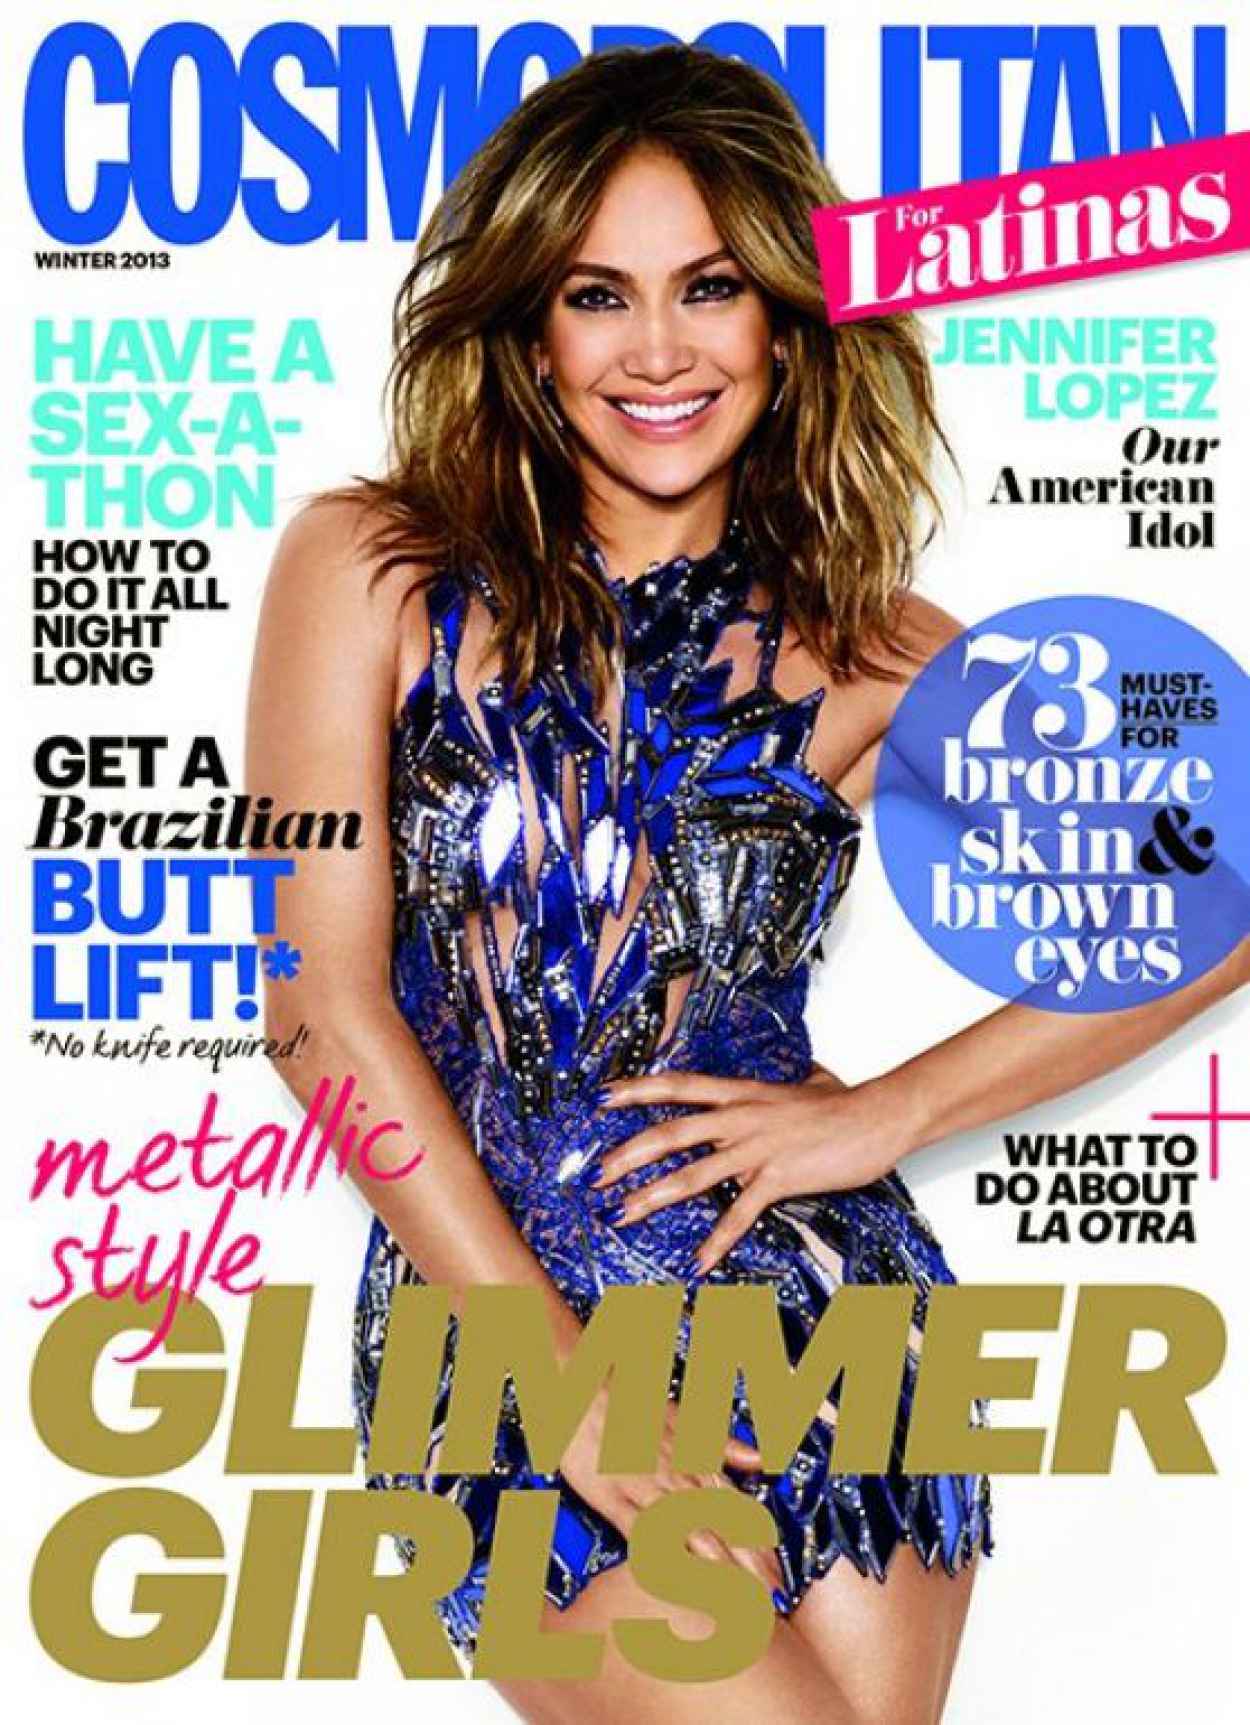 Jennifer Lopez - Leggy, Cosmo for Latinas Winter 2015 Issue-3